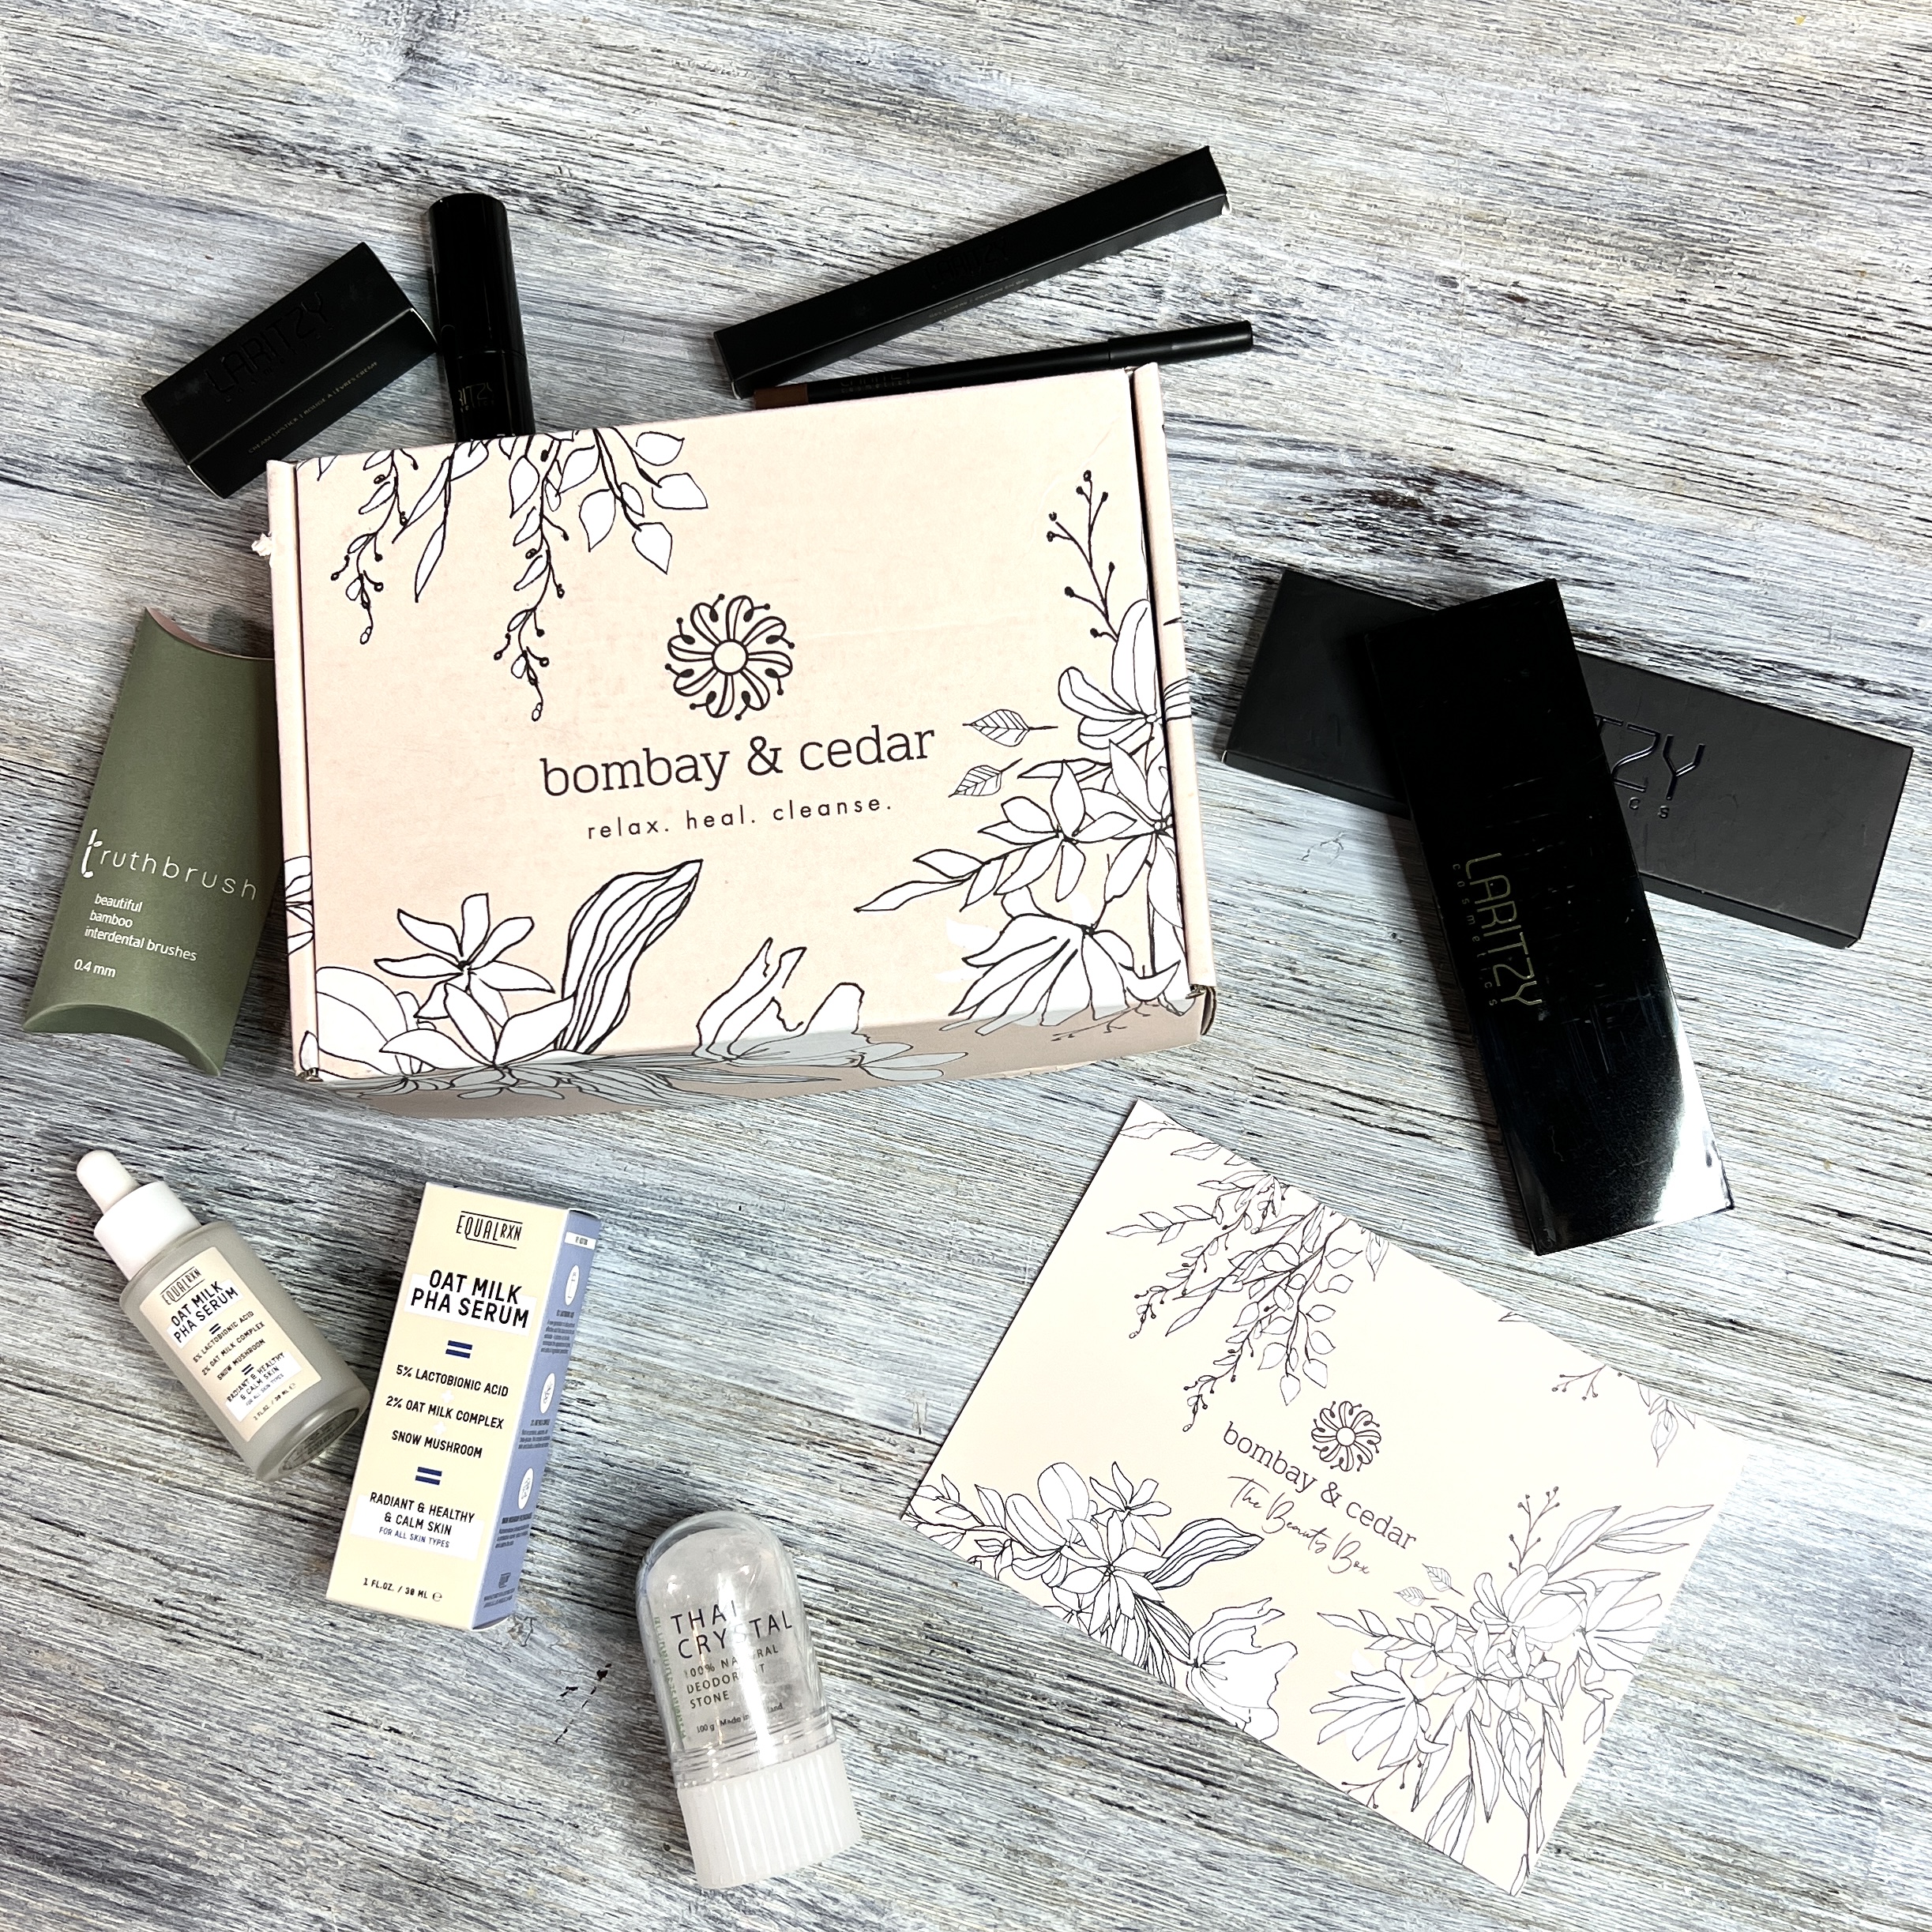 The Beauty Box by Bombay & Cedar “Fun” Review + Coupon